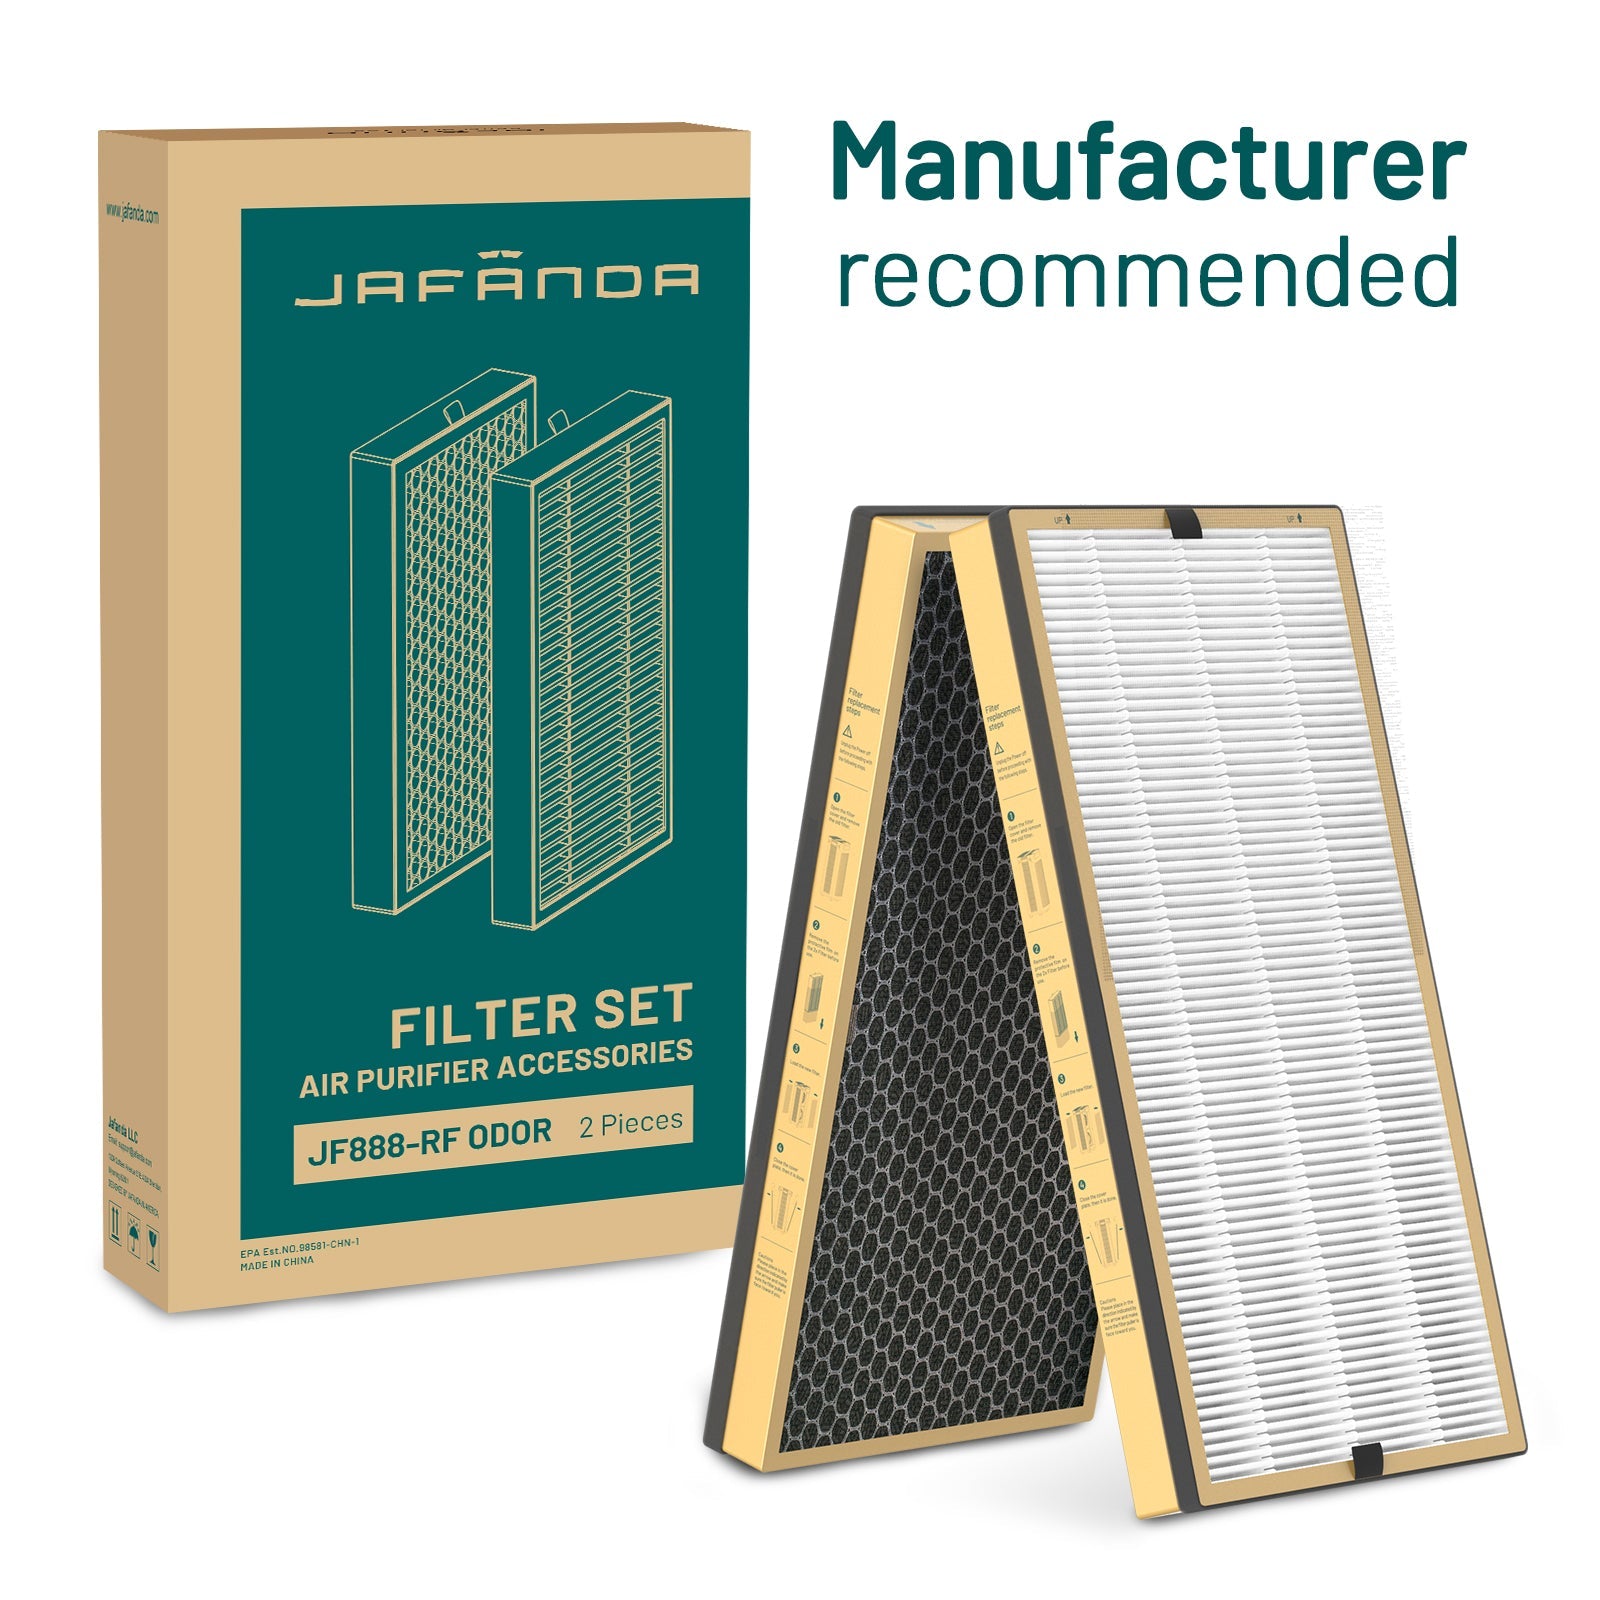 Jafända JF888 Air Purifier Replacement Filter, 2 Pack Activated Carbon Filters for Removing Ammonia, Amine, Mercaptan, Pet Odor, Body Odor and Smoke - Jafanda